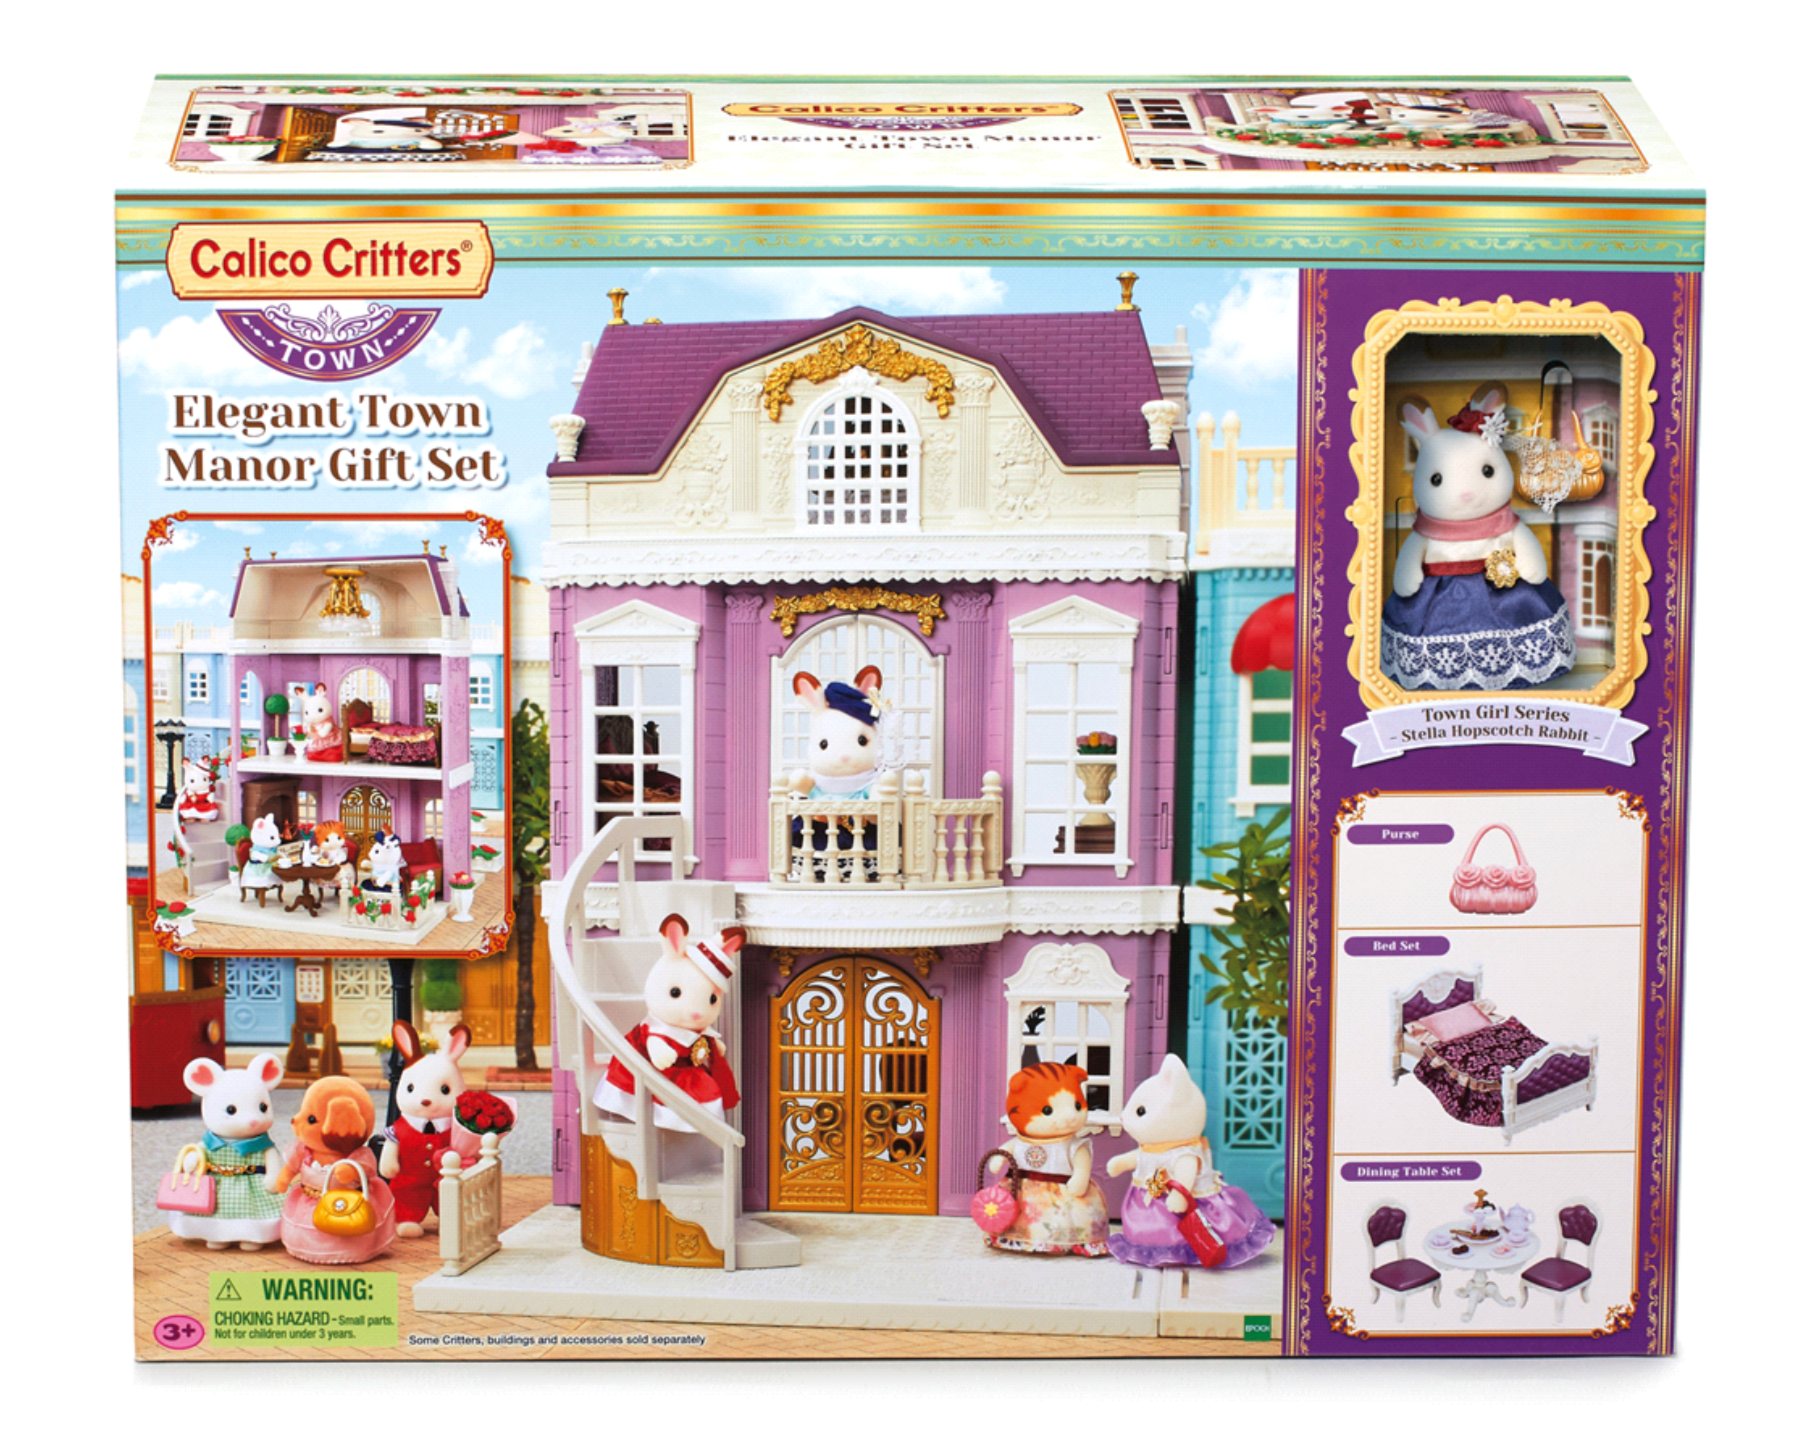 Calico Critters: Elegant Town Manor Gift Set